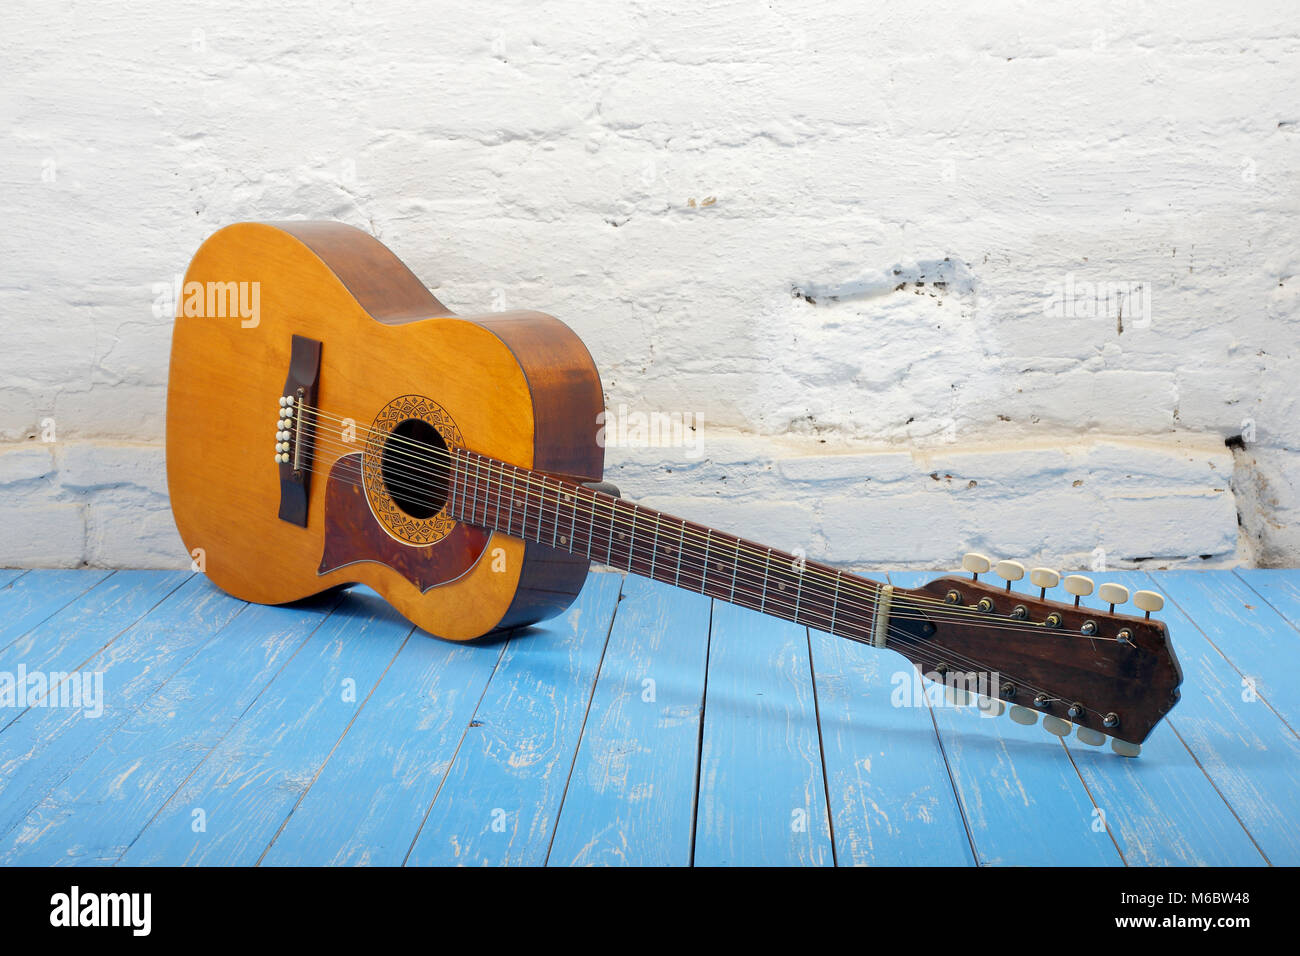 Musical instrument - Vintage twelve-string acoustic guitar on a brick background and blue wooden floor. Stock Photo